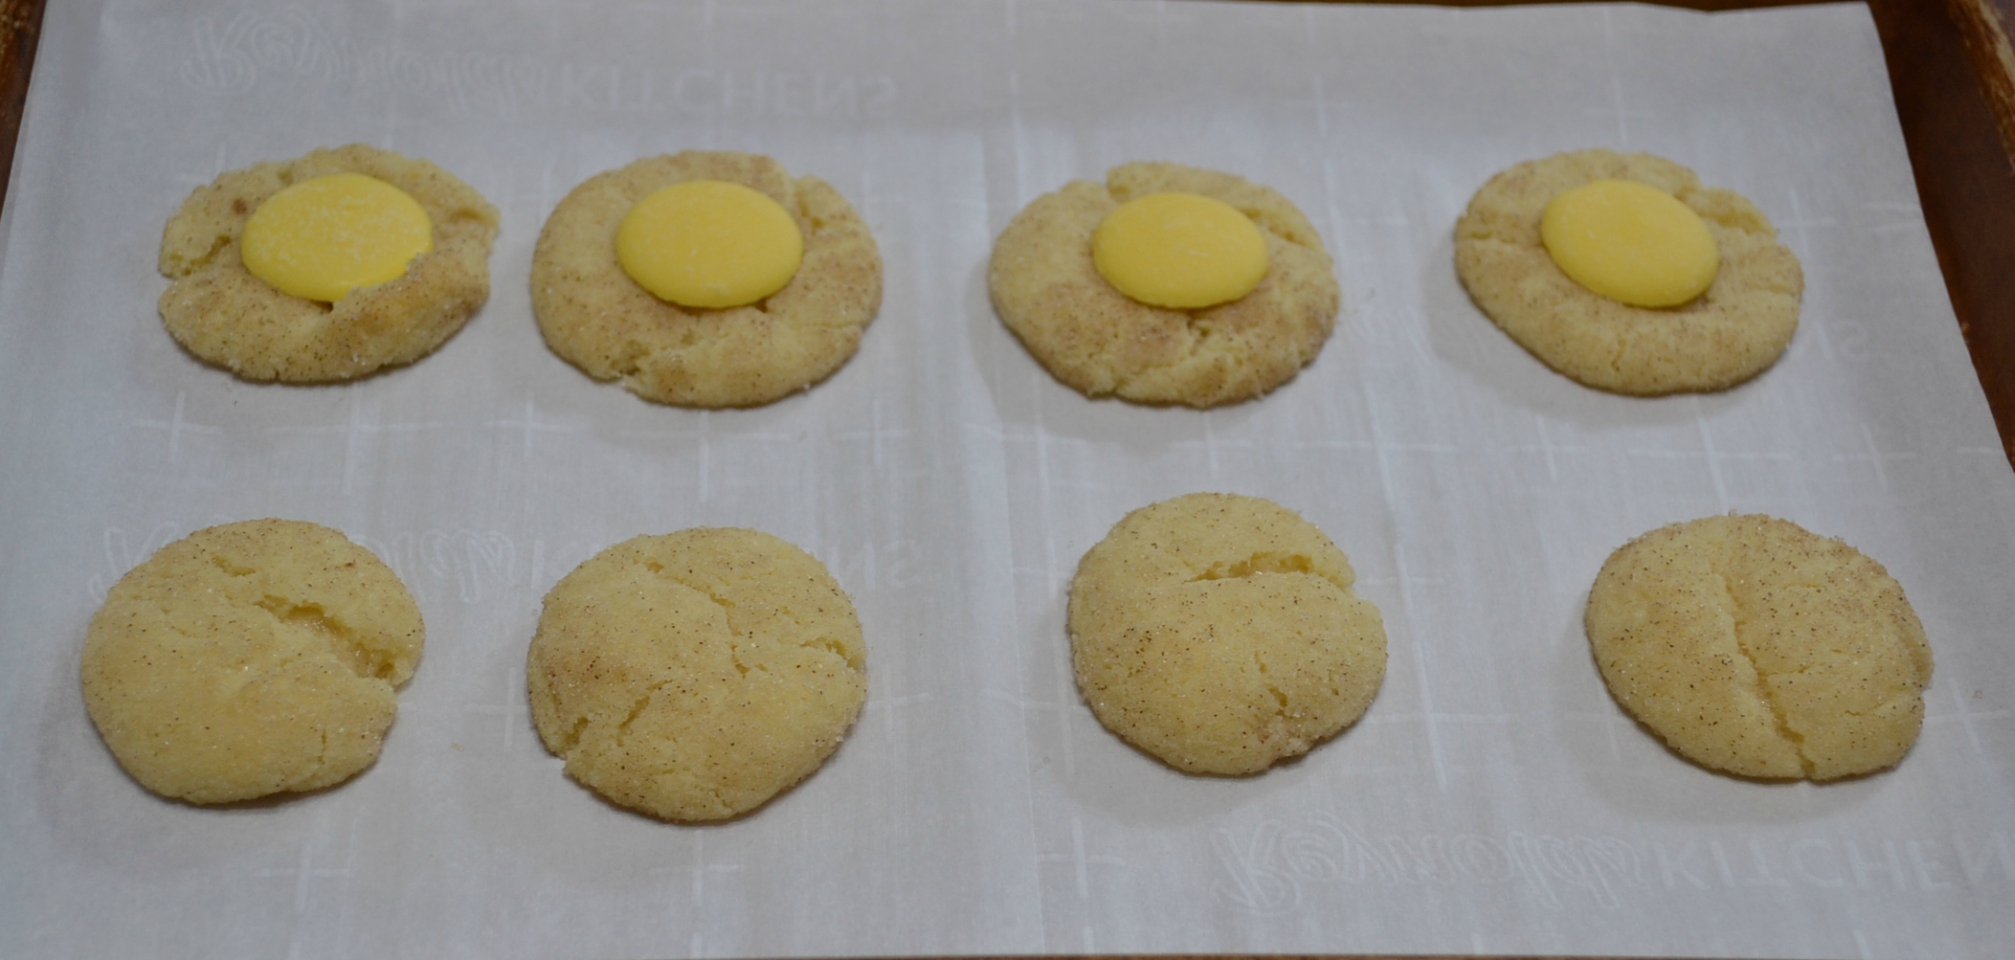 Lemon Burst Snickerdoodle Cookies are a delicious, lemon flavored variation of a snickerdoodle cookie.